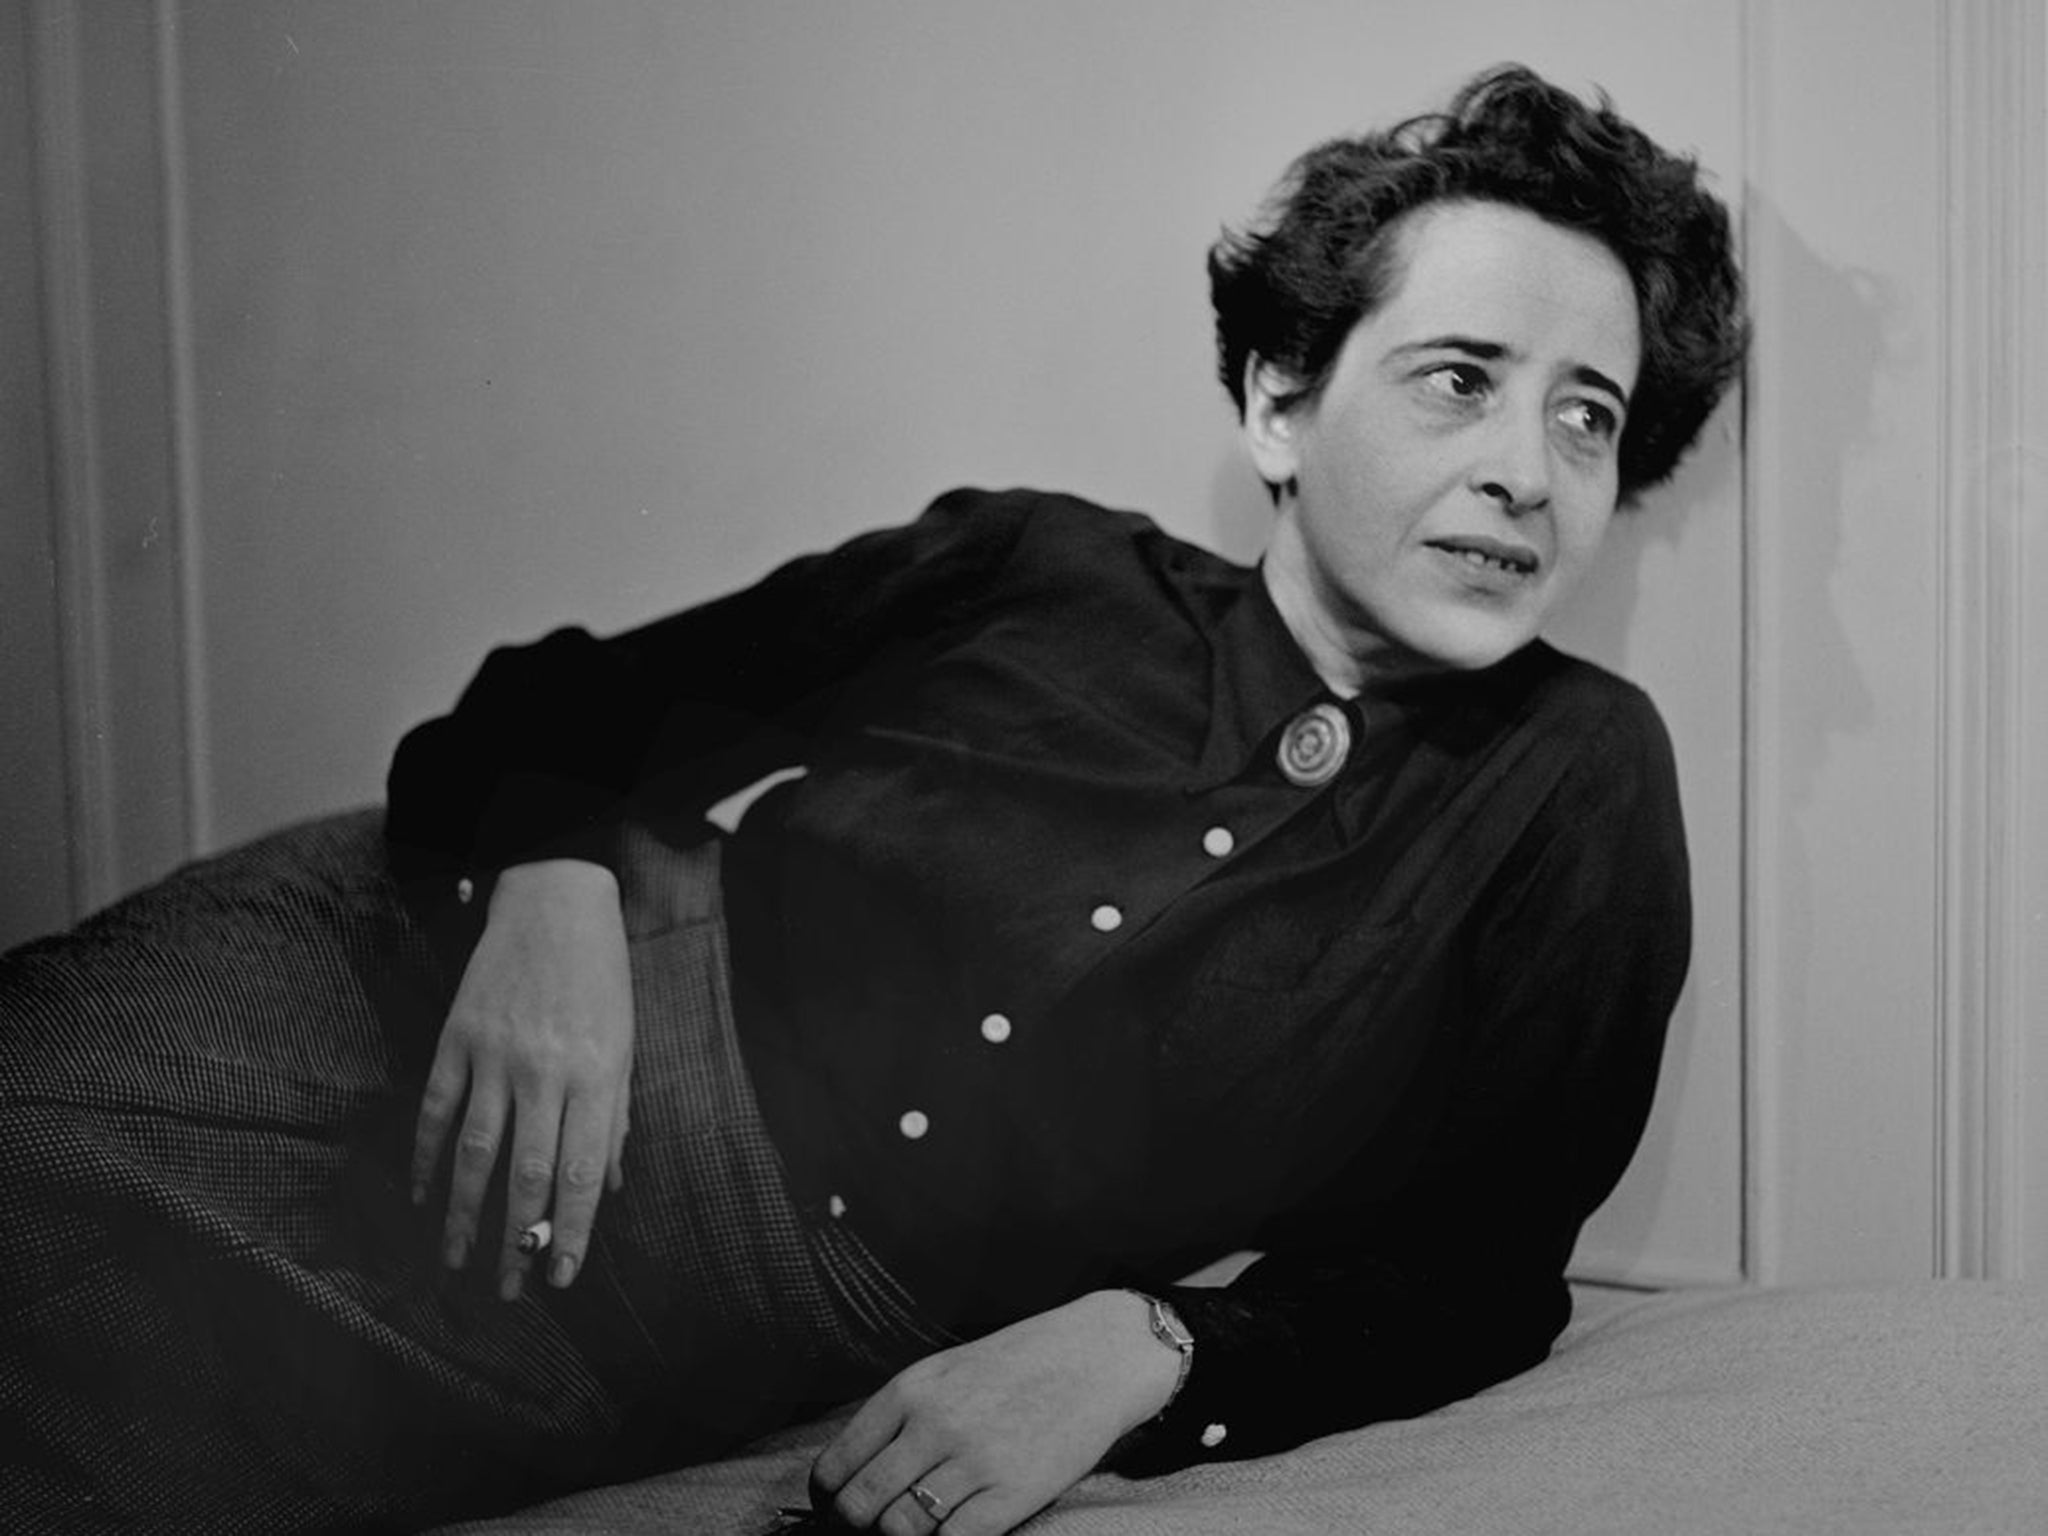 Hannah Arendt, the philosopher and political theorist